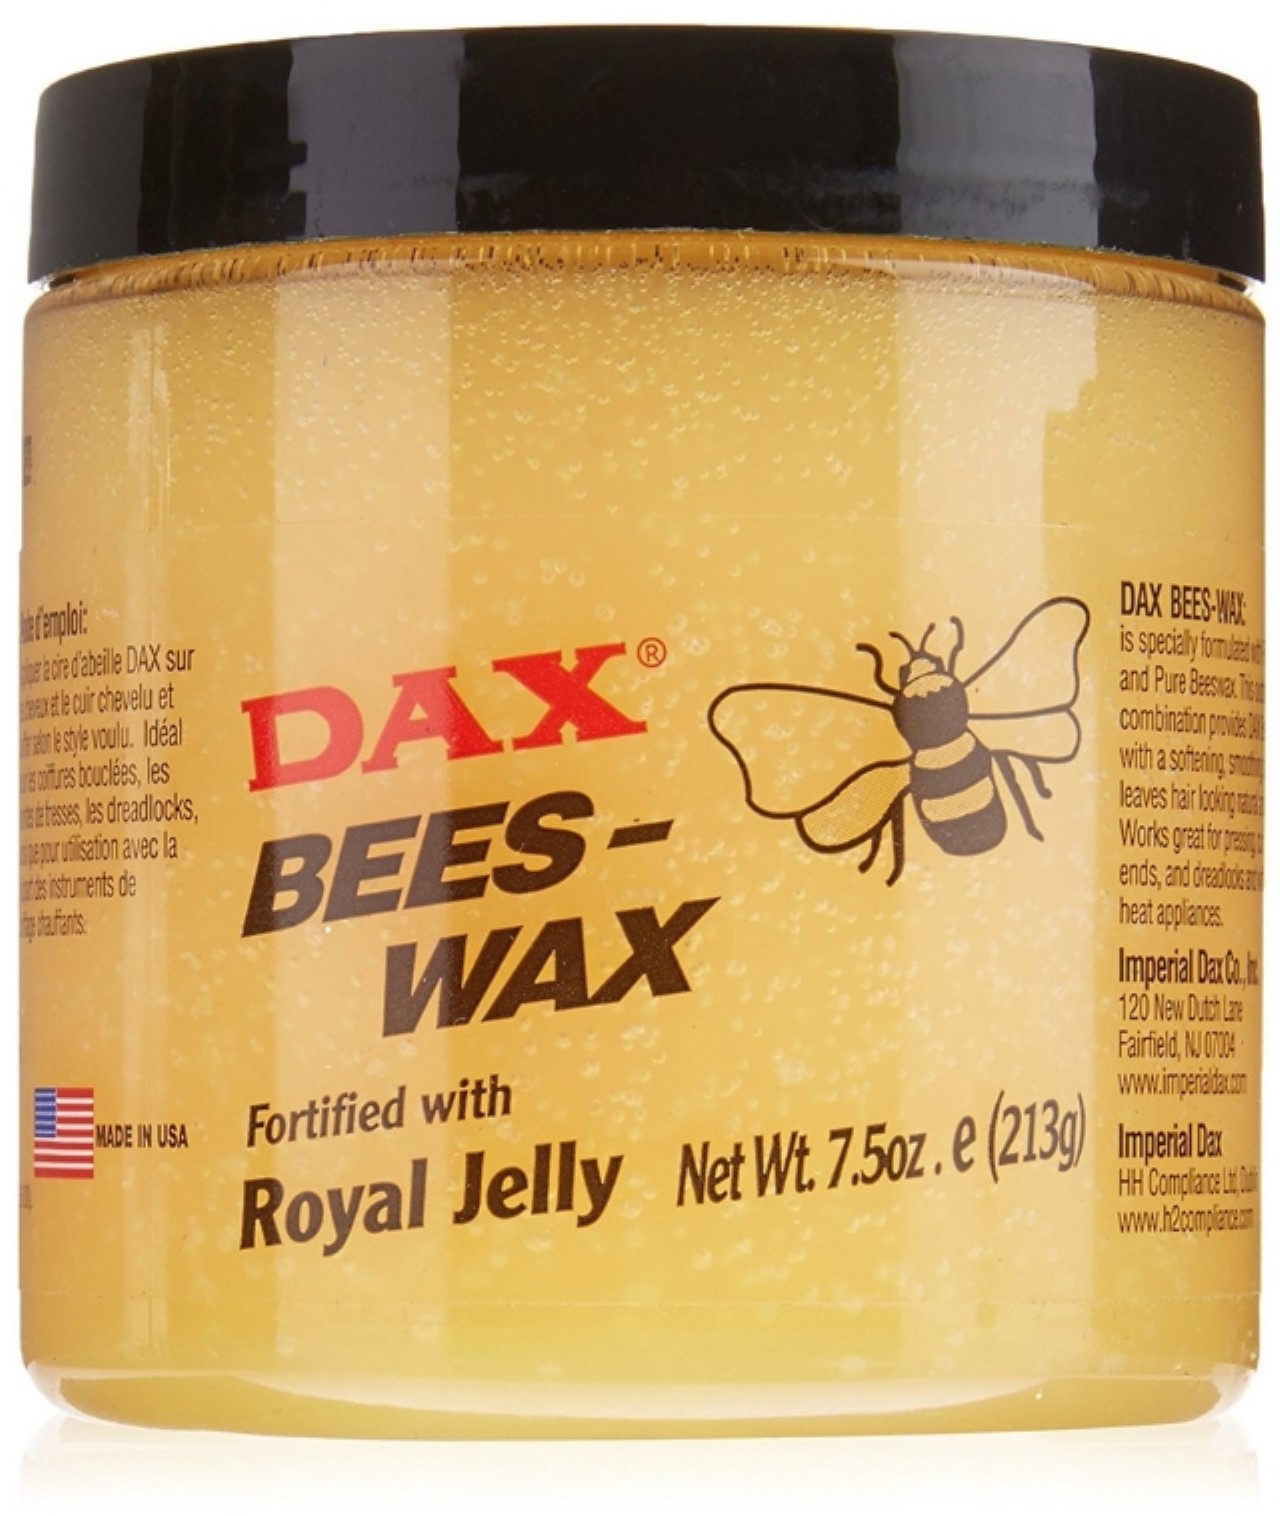 Dax Bees Wax with Royal Jelly - 7.5 oz jar